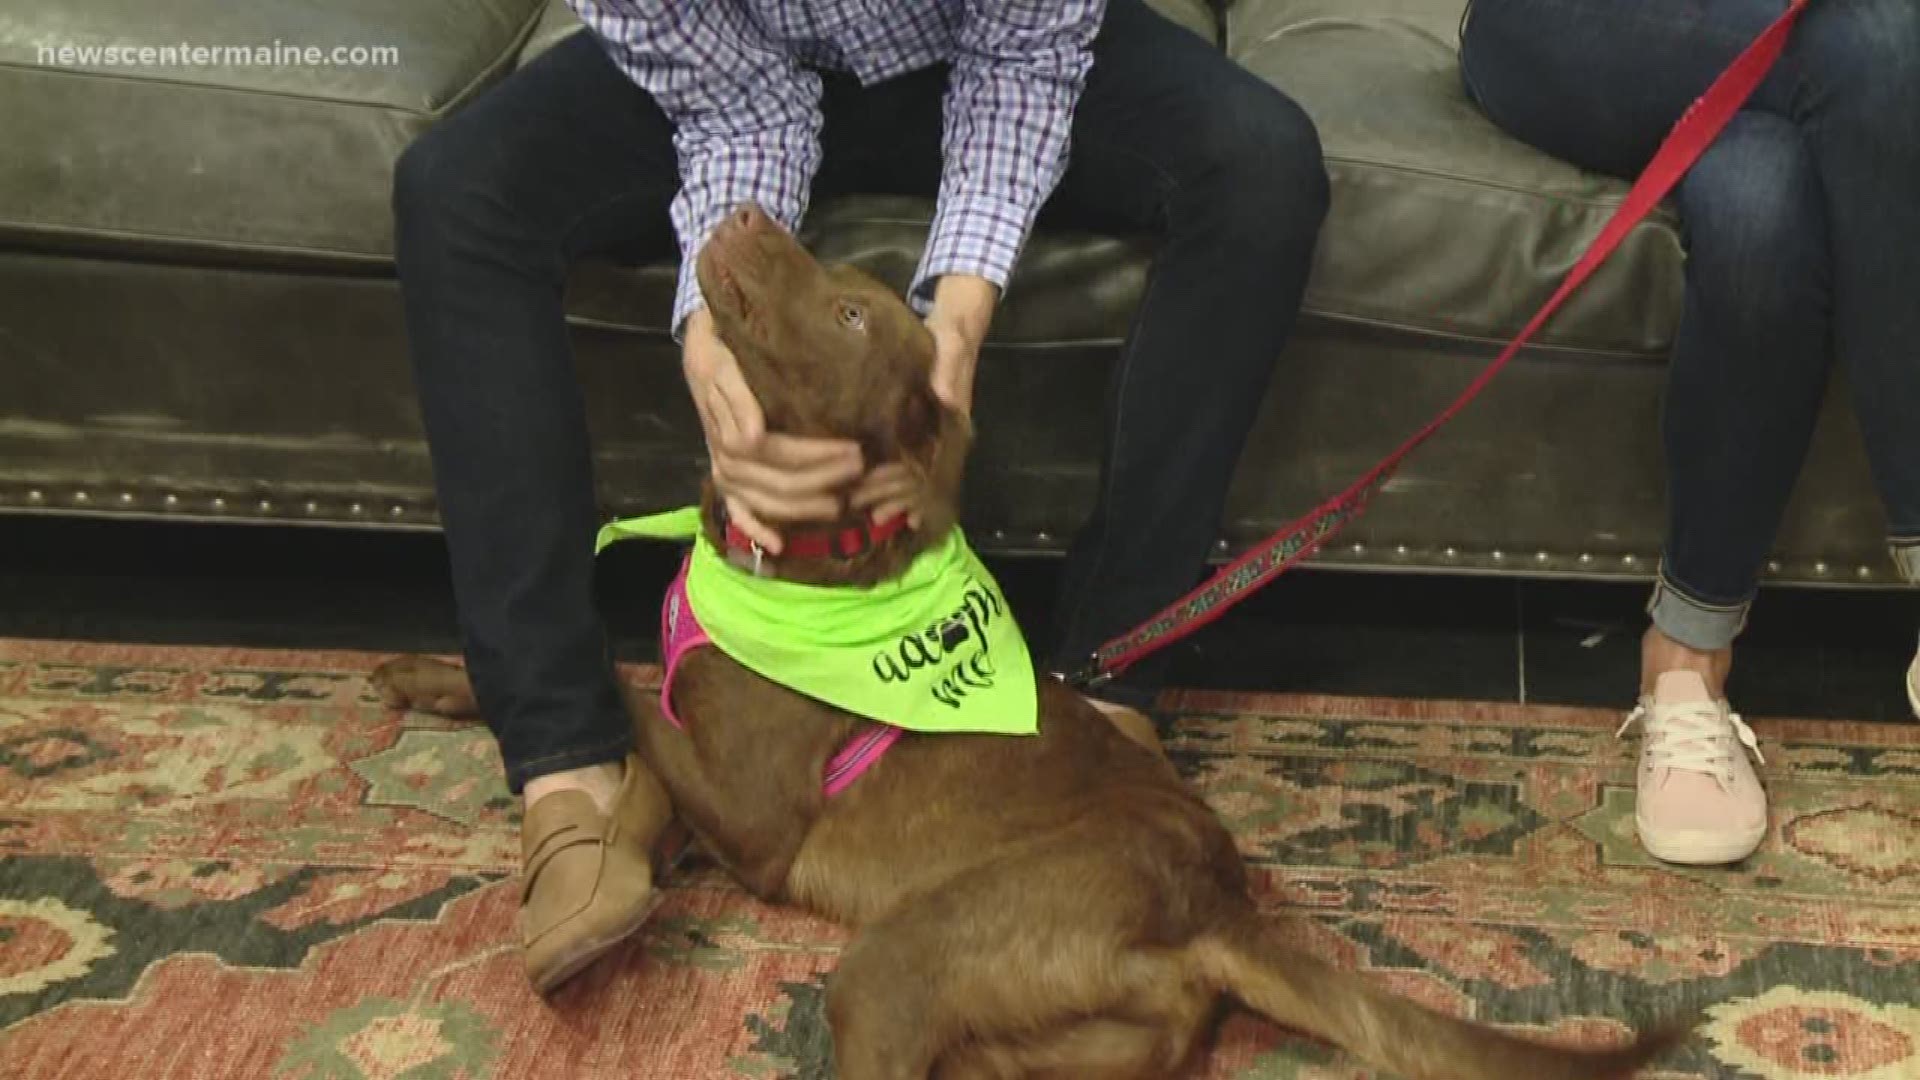 Shawn the 1-year-old lab mix is available for adoption through New England Labs Rescue